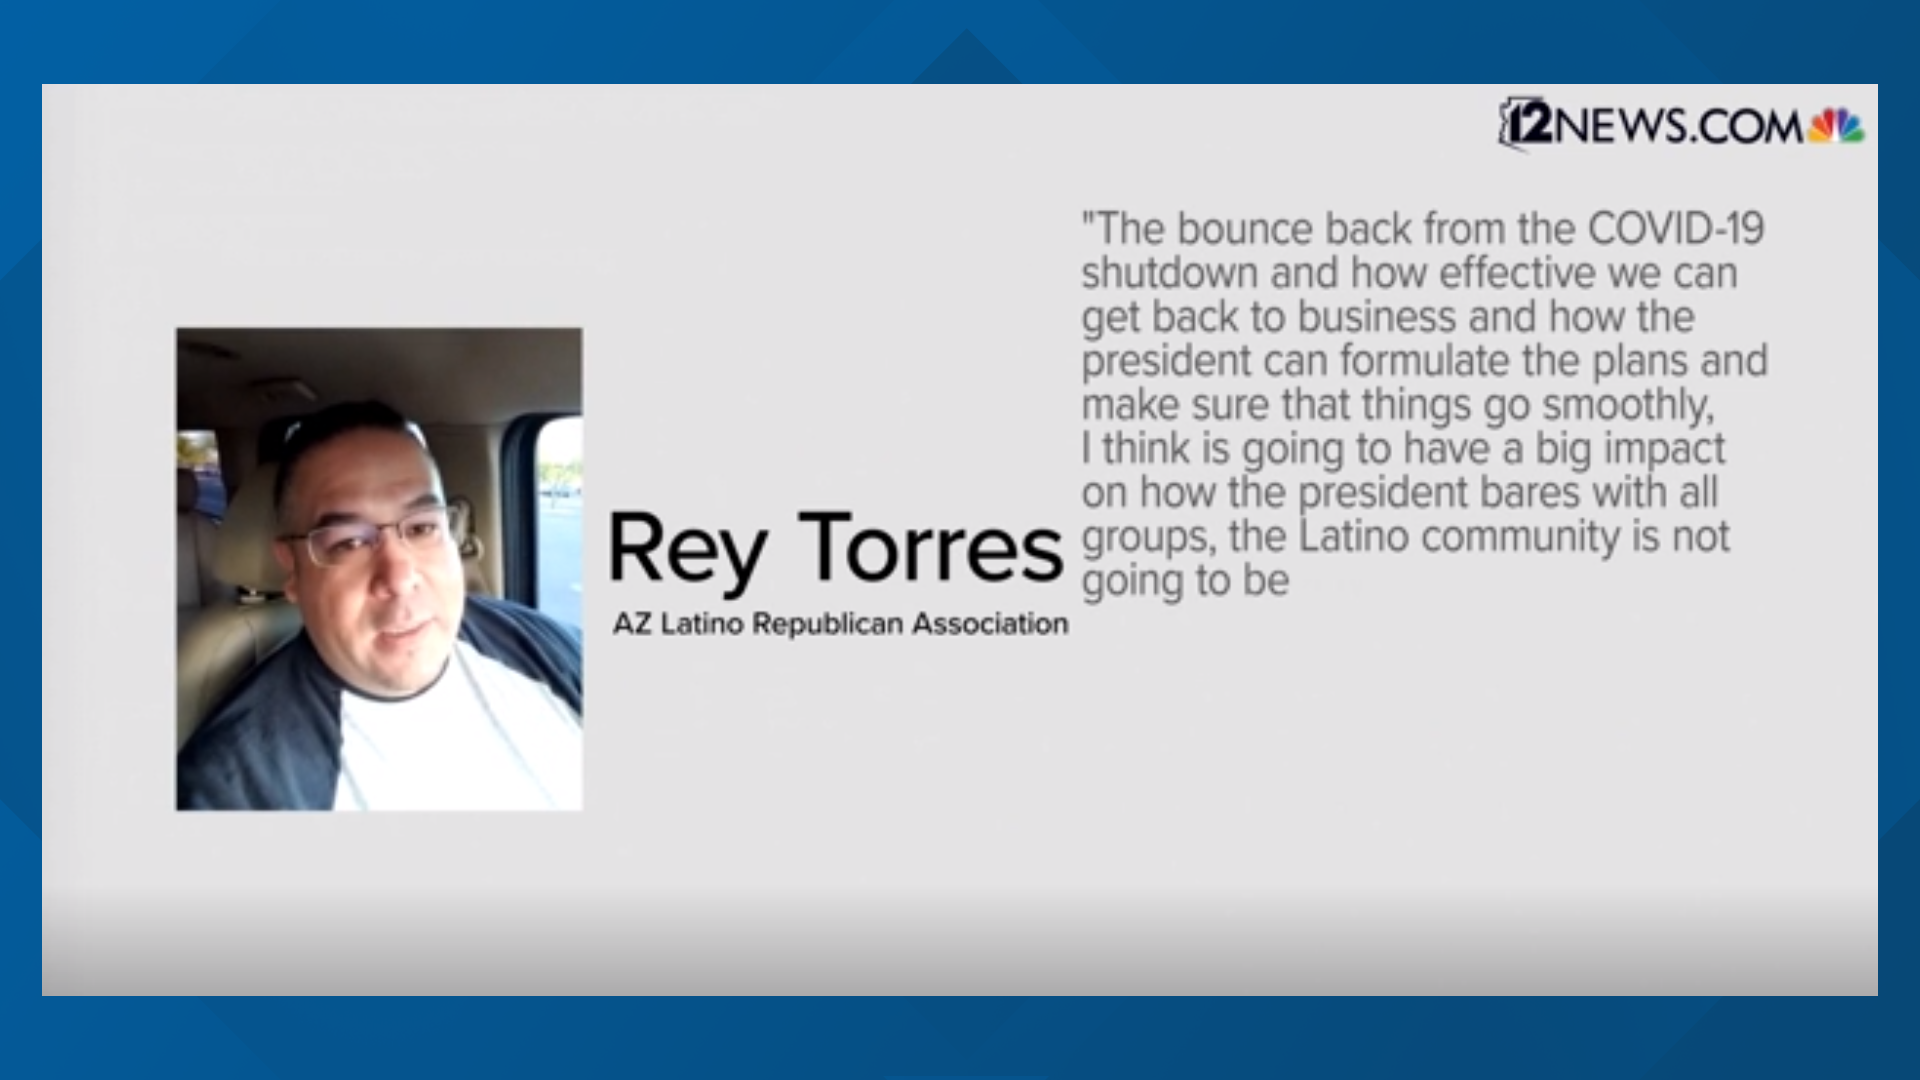 Rey Torres says the recovery on the nation's economy after the coronavirus pandemic will play an important role in the presidential elections.